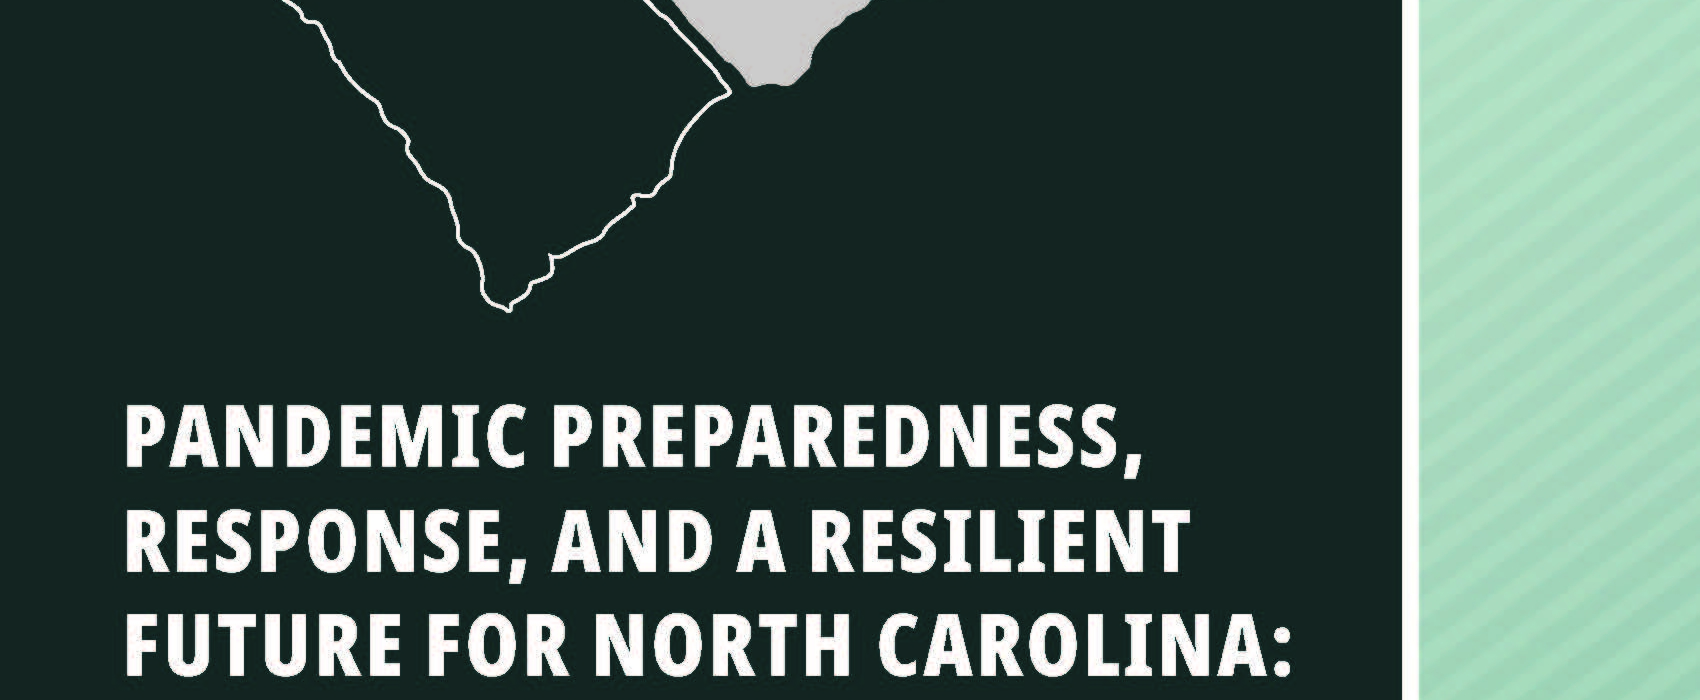 Pandemic Preparedness, Response, and a Resilient Future for North Carolina: Recommendations from the Carolinas Pandemic Preparedness Task Force